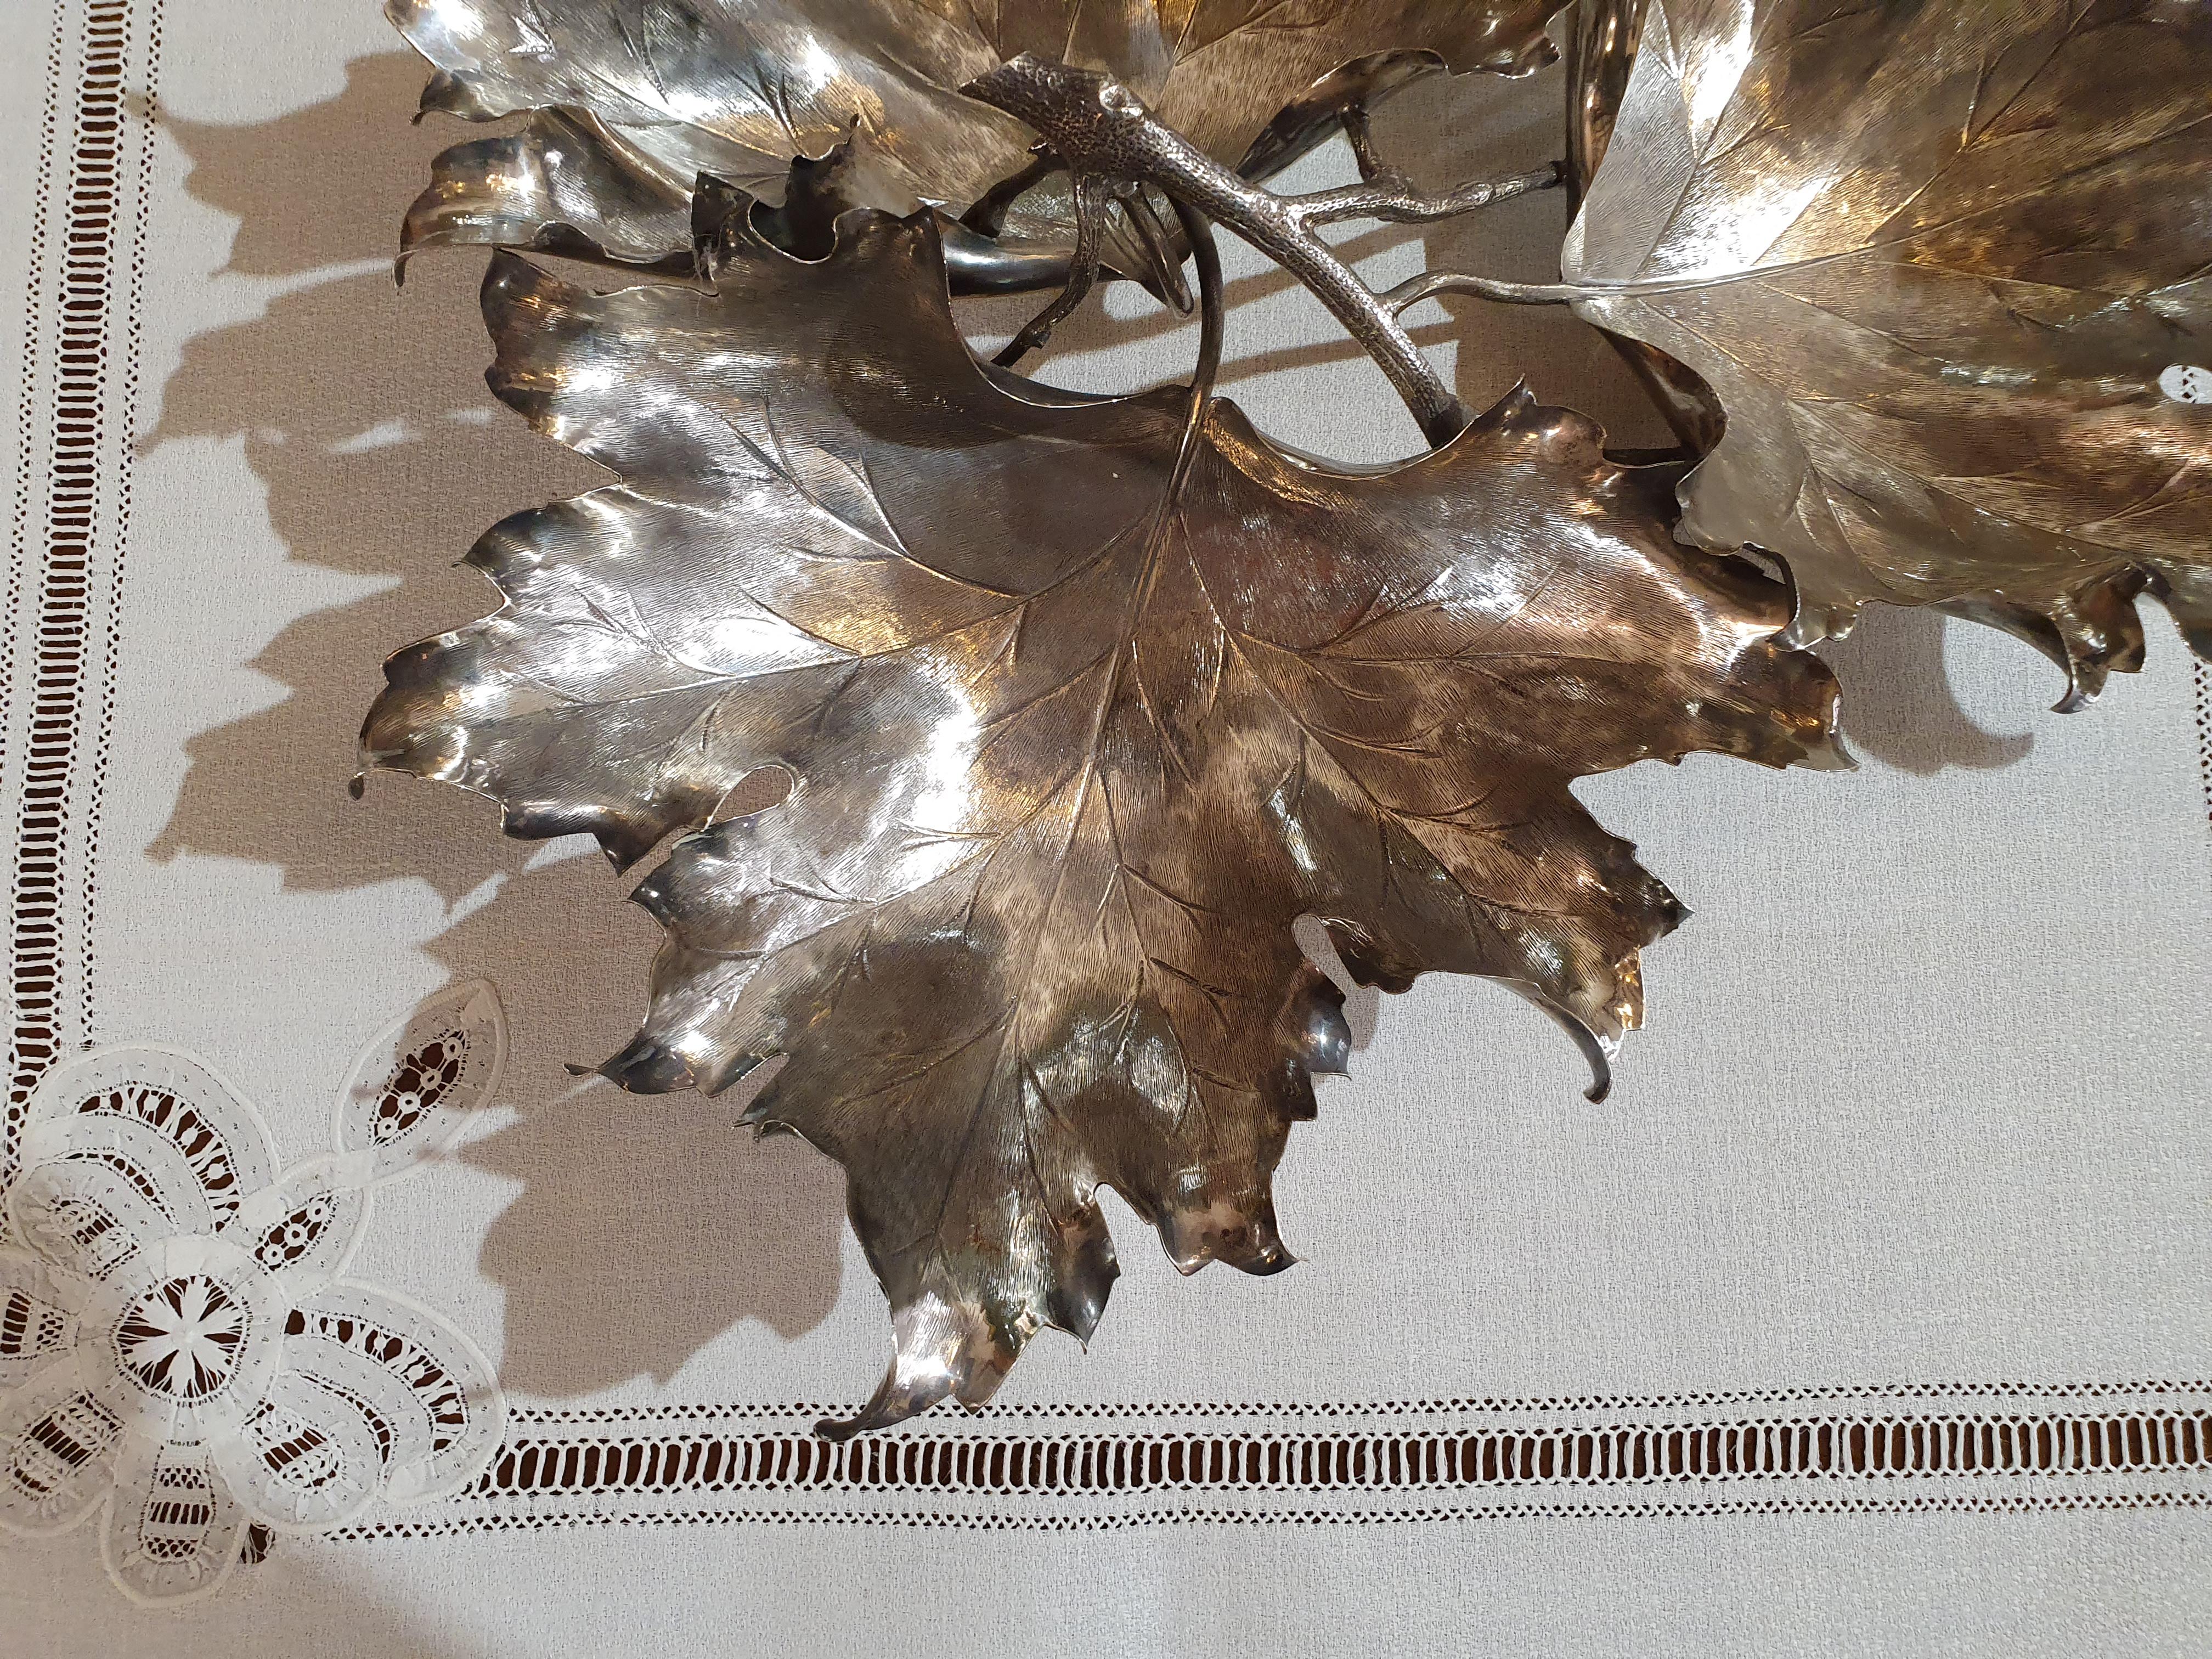 Outstanding large sterling silver handmade leaf motifs centerpiece by Ilario Pradella for Bellezza Cagliari. New, never used
Pradella Iario, founded in 1920, was the greatest Italian silversmith of the second half of the 20th century, famous for